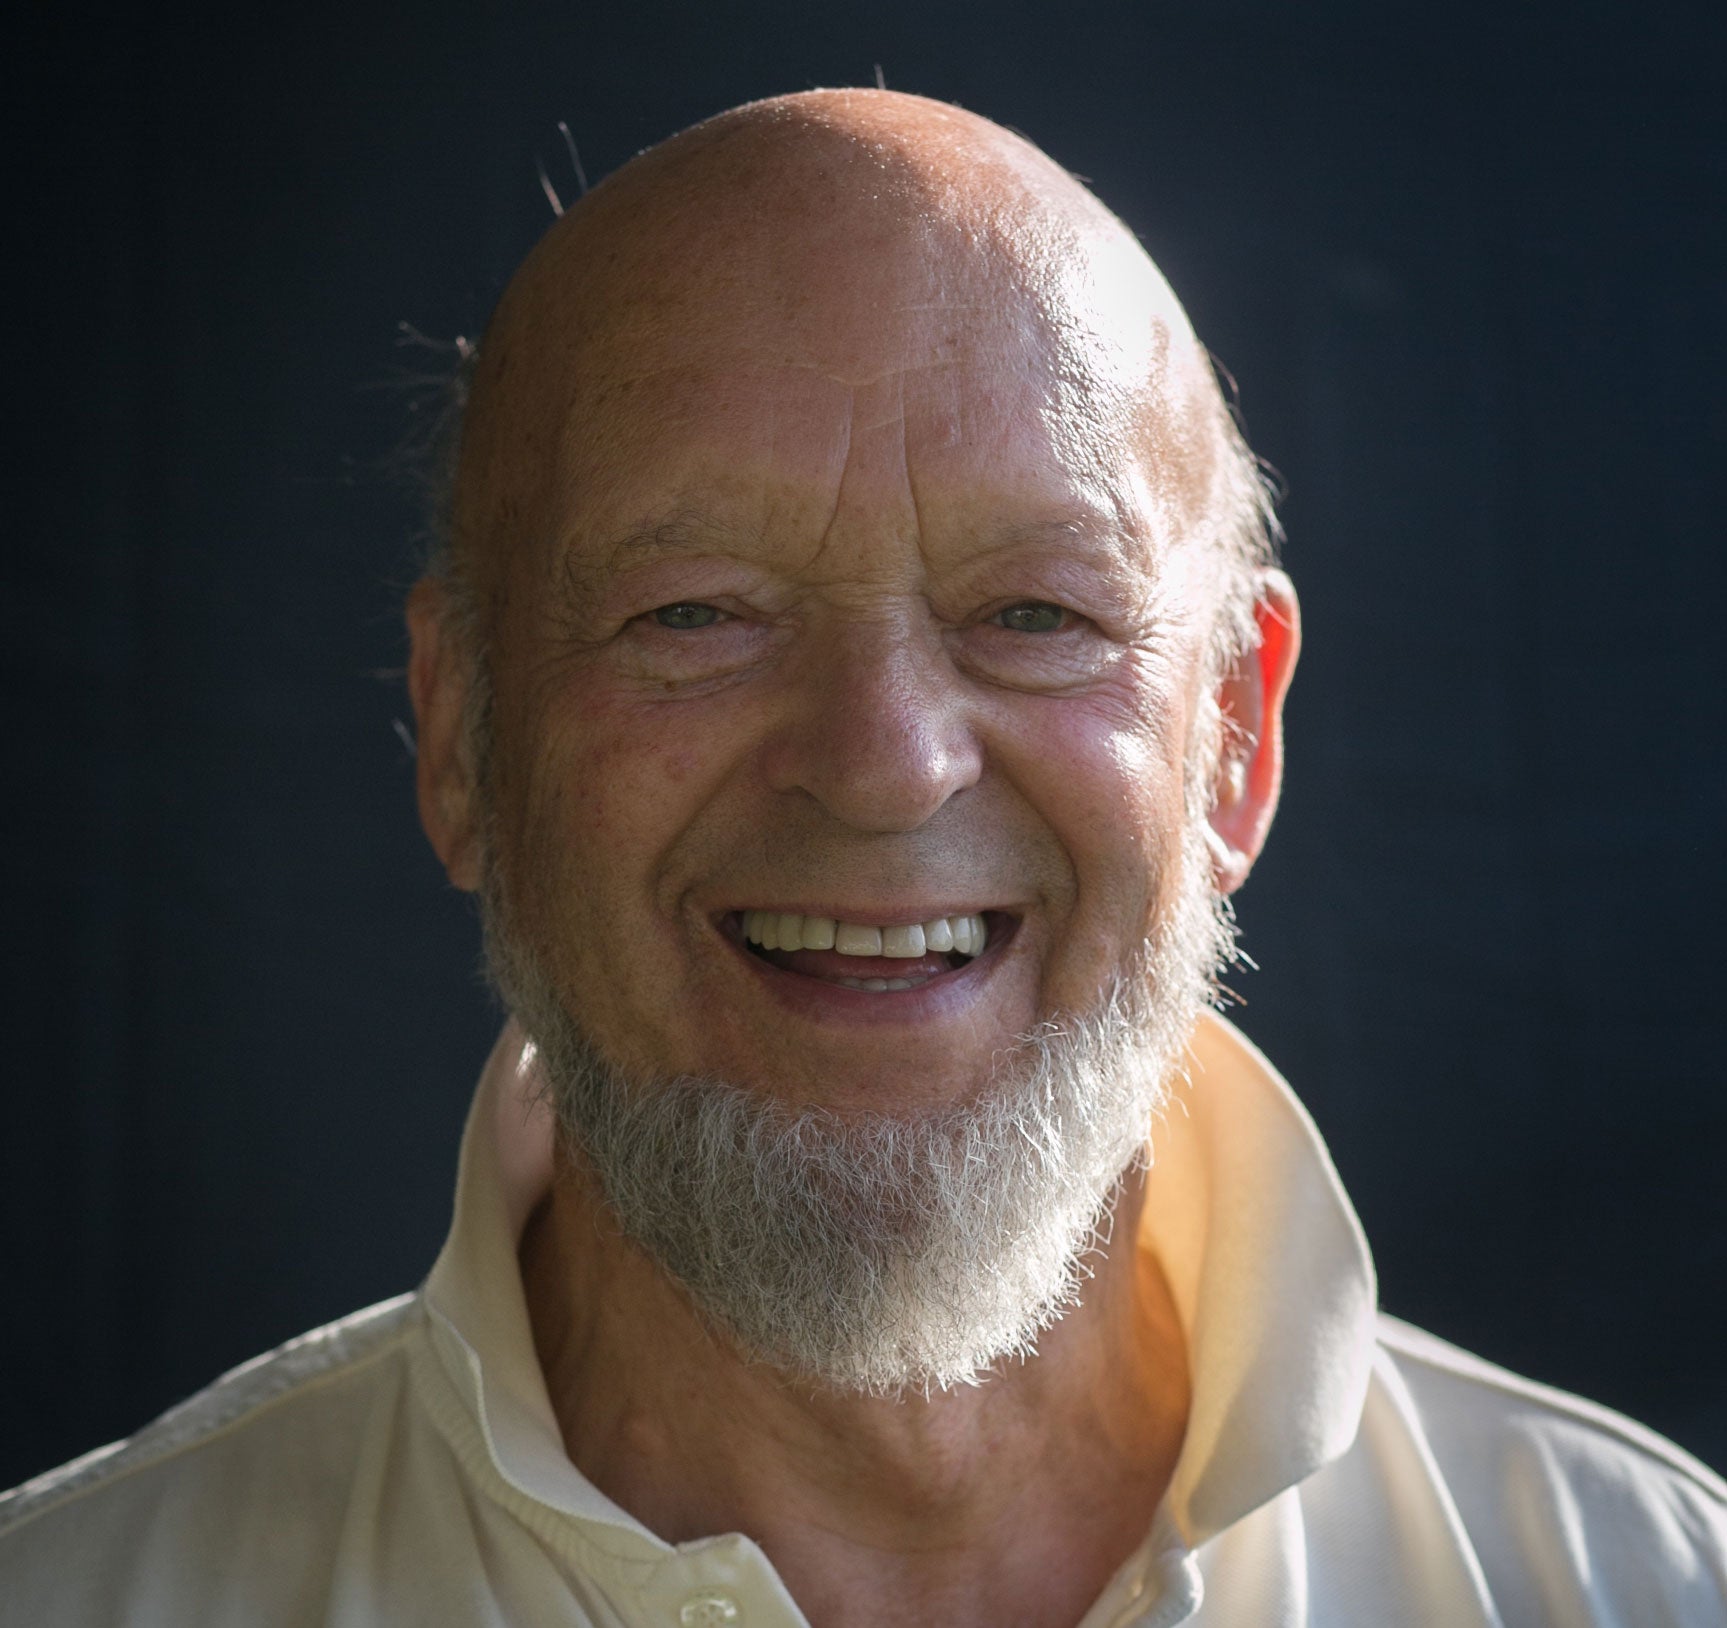 Michael Eavis pictured on the eve of the first day of the 2014 Glastonbury Festival